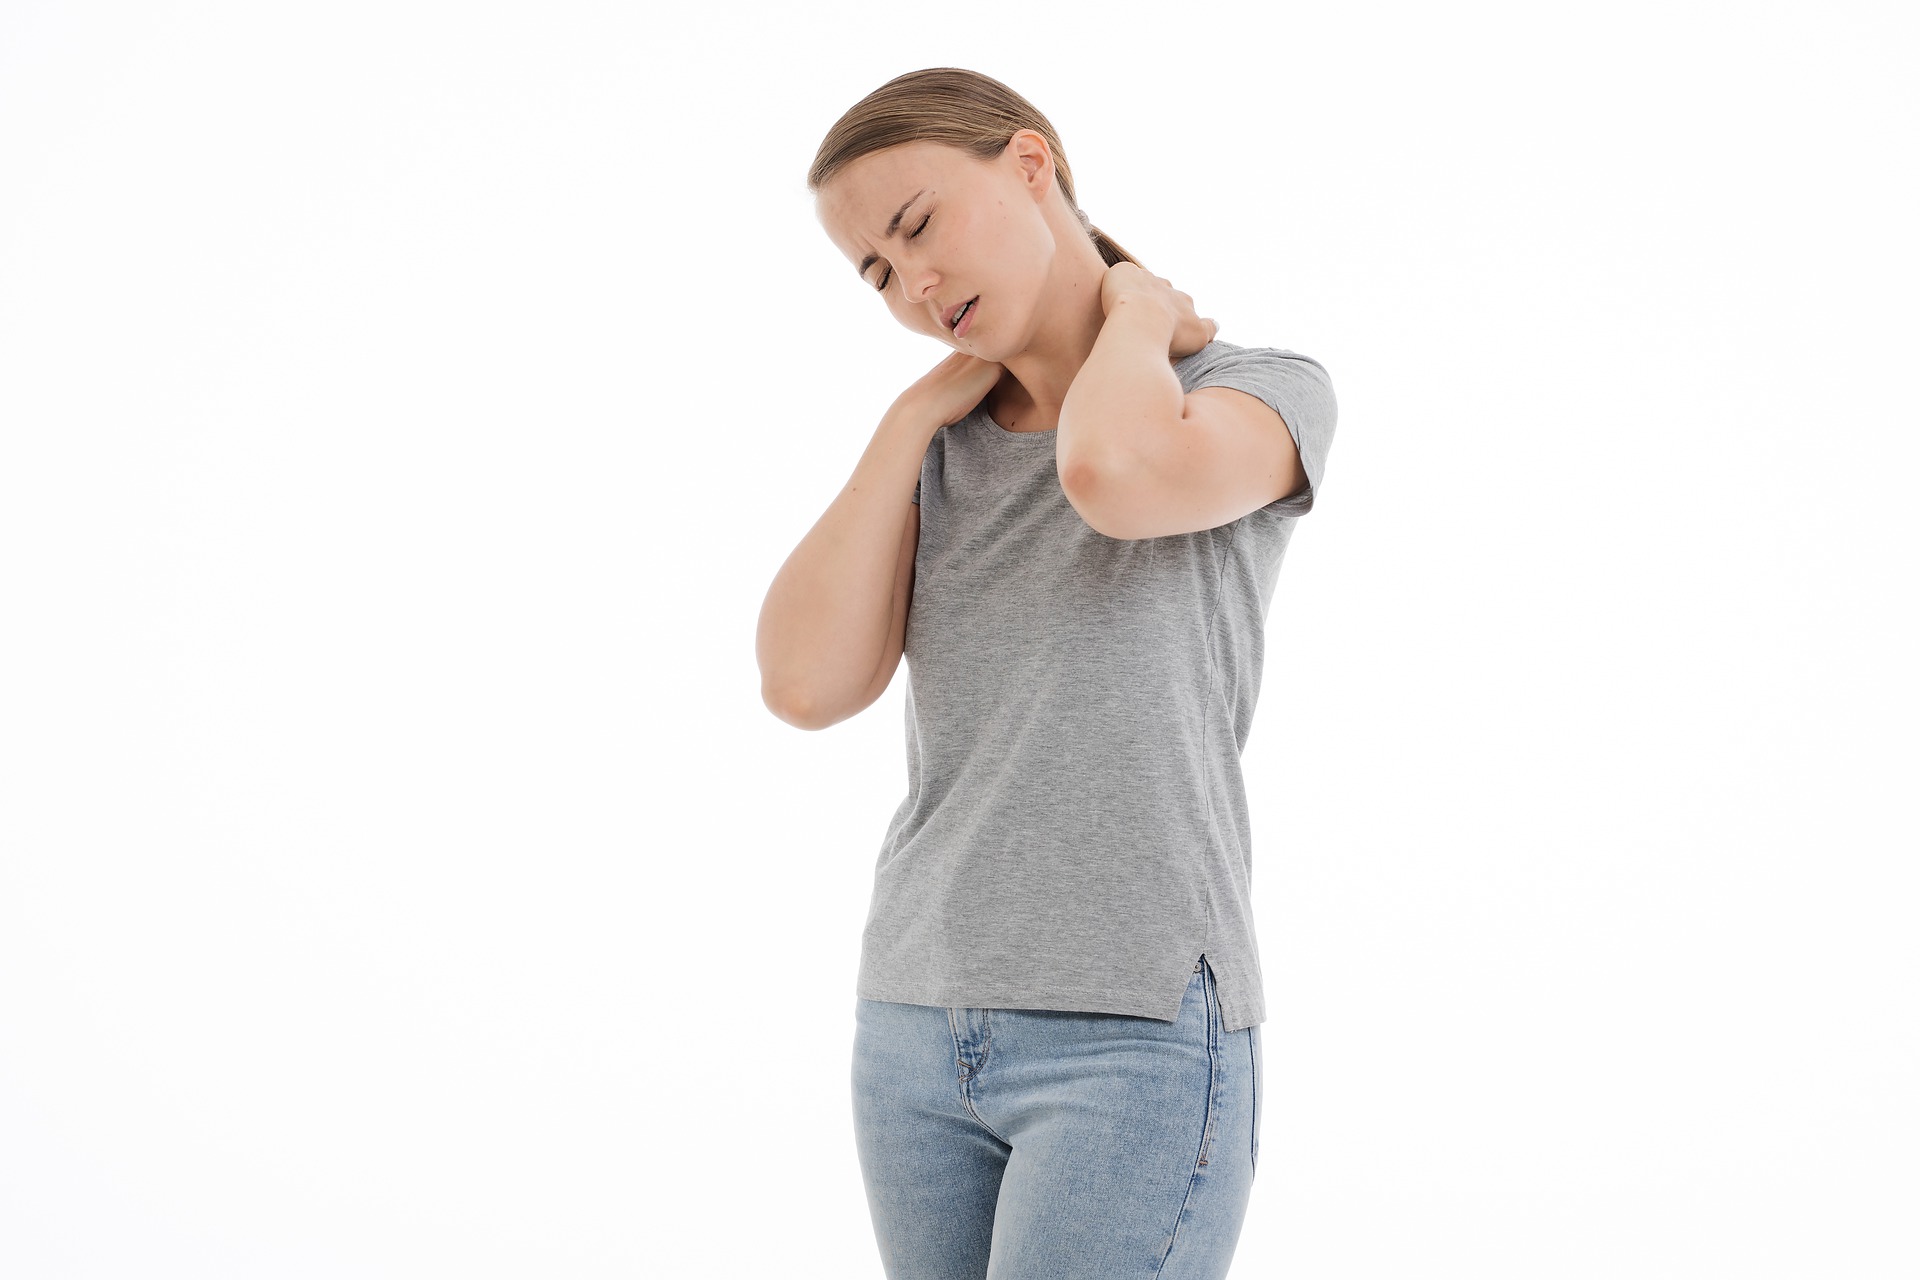 13 Most Common Causes of Neck Pain